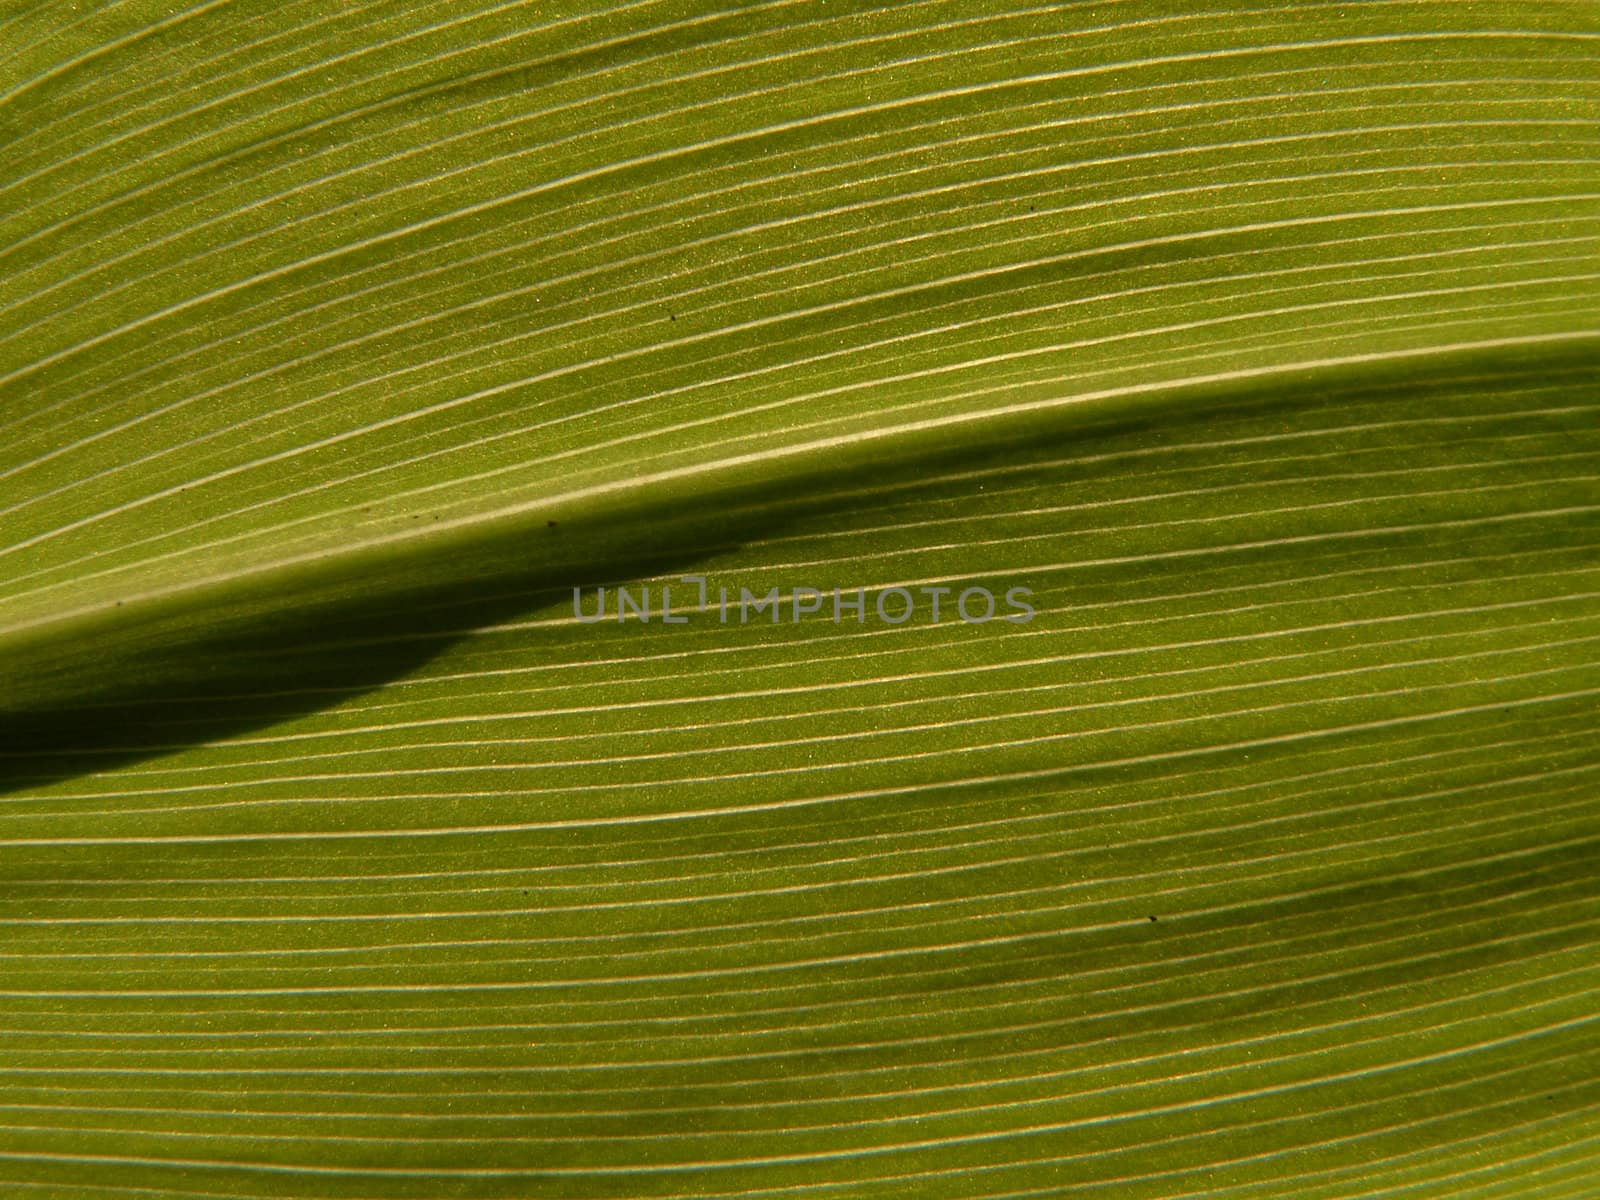 Leaf of the lily of the valley